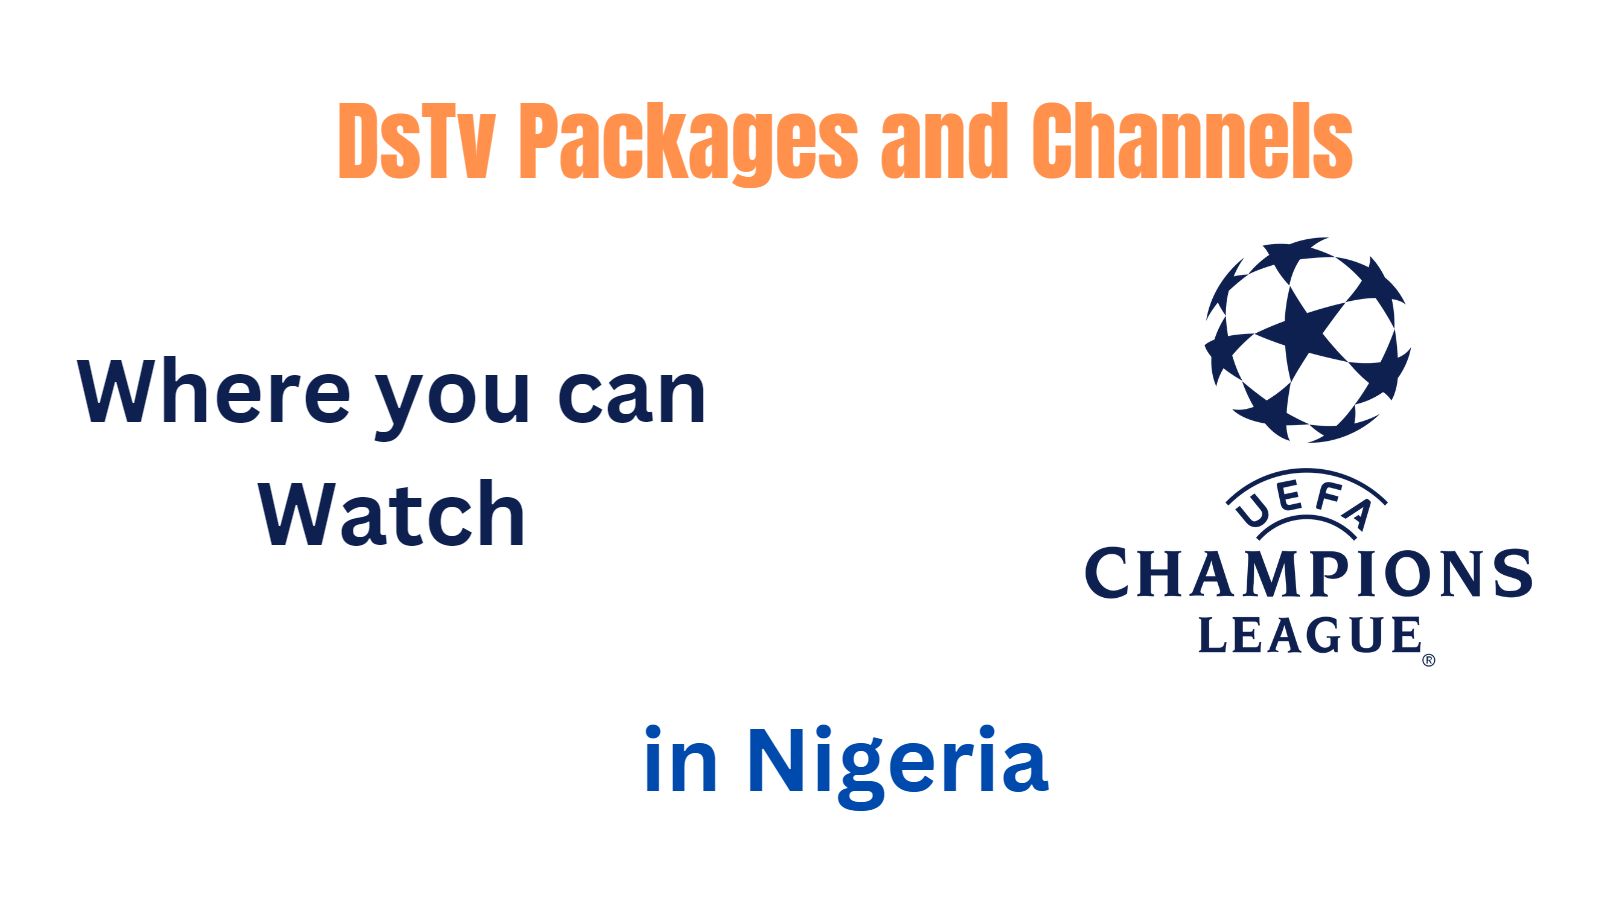 DsTv Packages and Channels showing Champions League in Nigeria